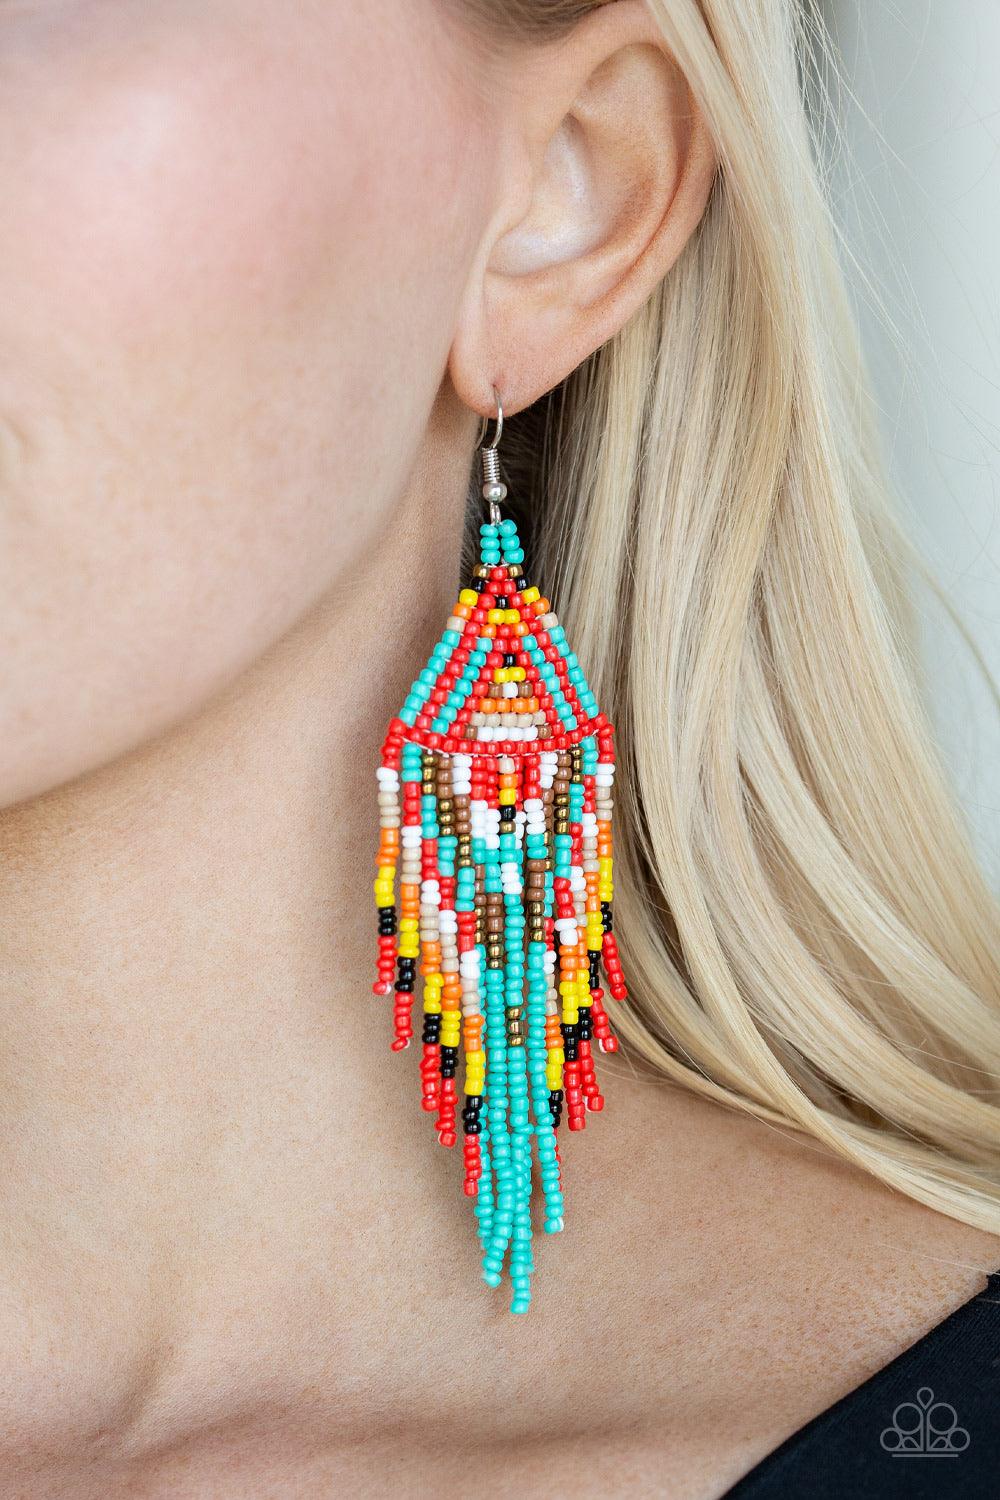 Paparazzi Accessories Boho Blast - Blue Featuring black, blue, brass, brown, orange, white, red, and yellow seed beads, dainty beaded tassels swing from a beaded triangular frame for a colorful tribal look. Earring attaches to a standard fishhook fitting.